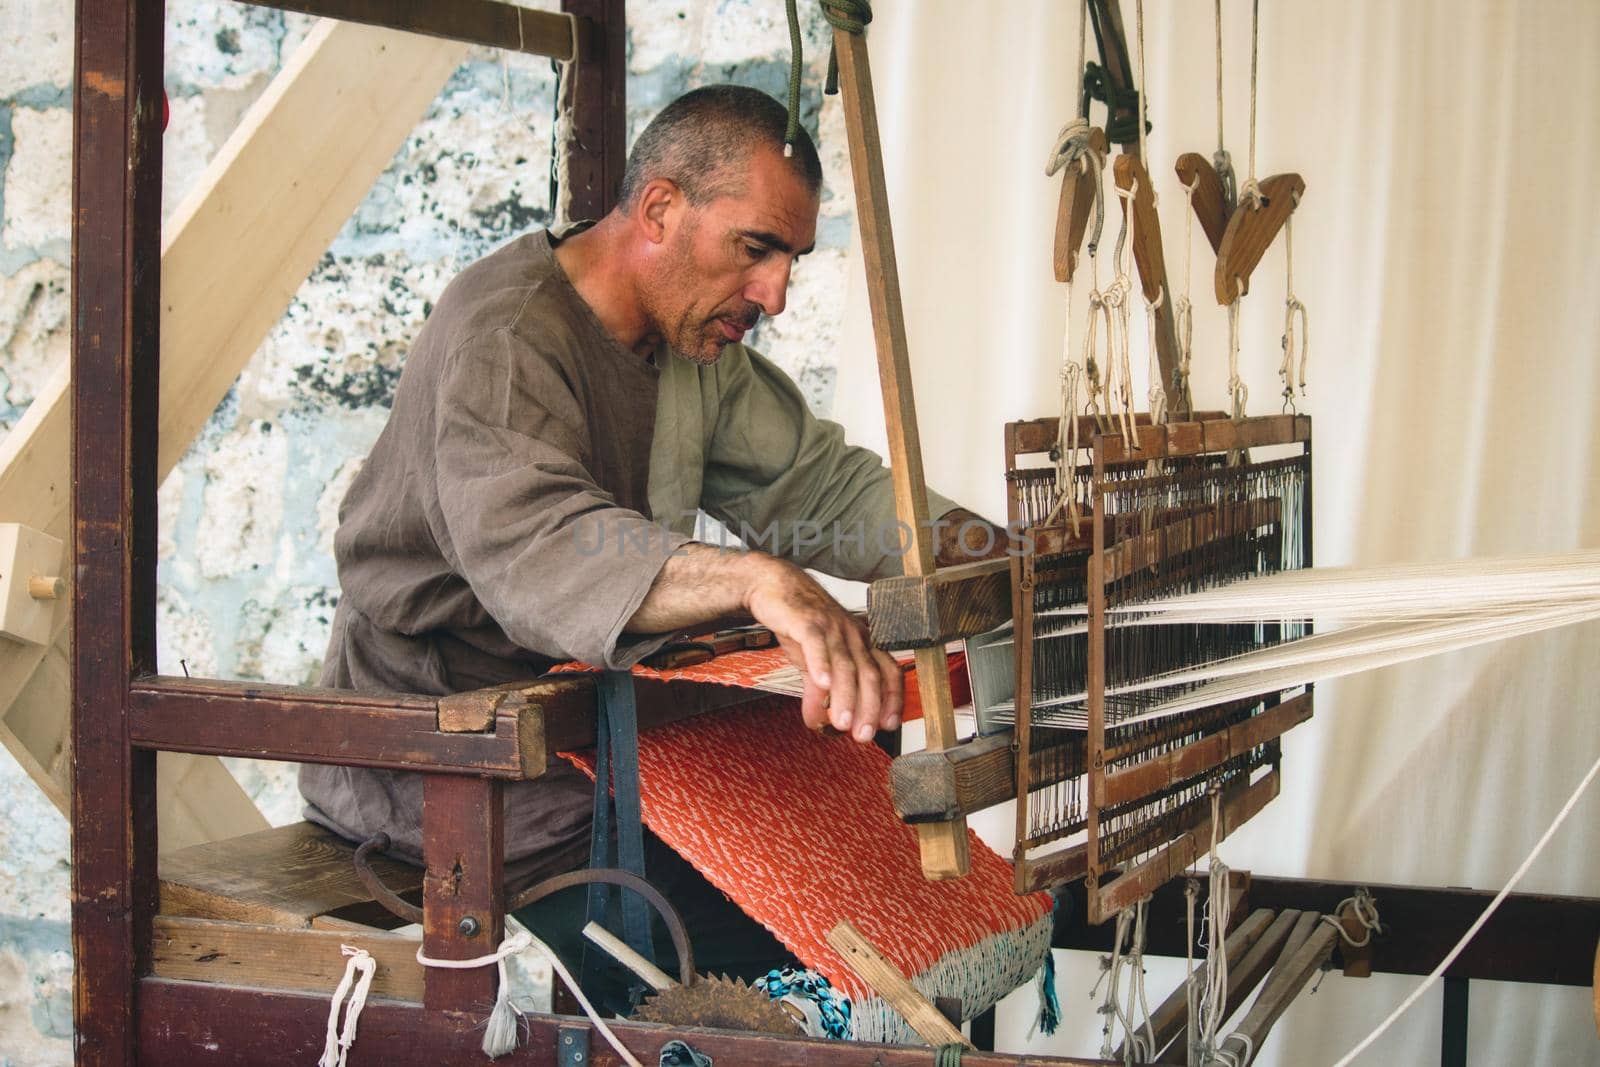 MDINA / MALTA - MAY 04 2019: Man using a foot-treadle floor loom to weave cloth by tennesseewitney